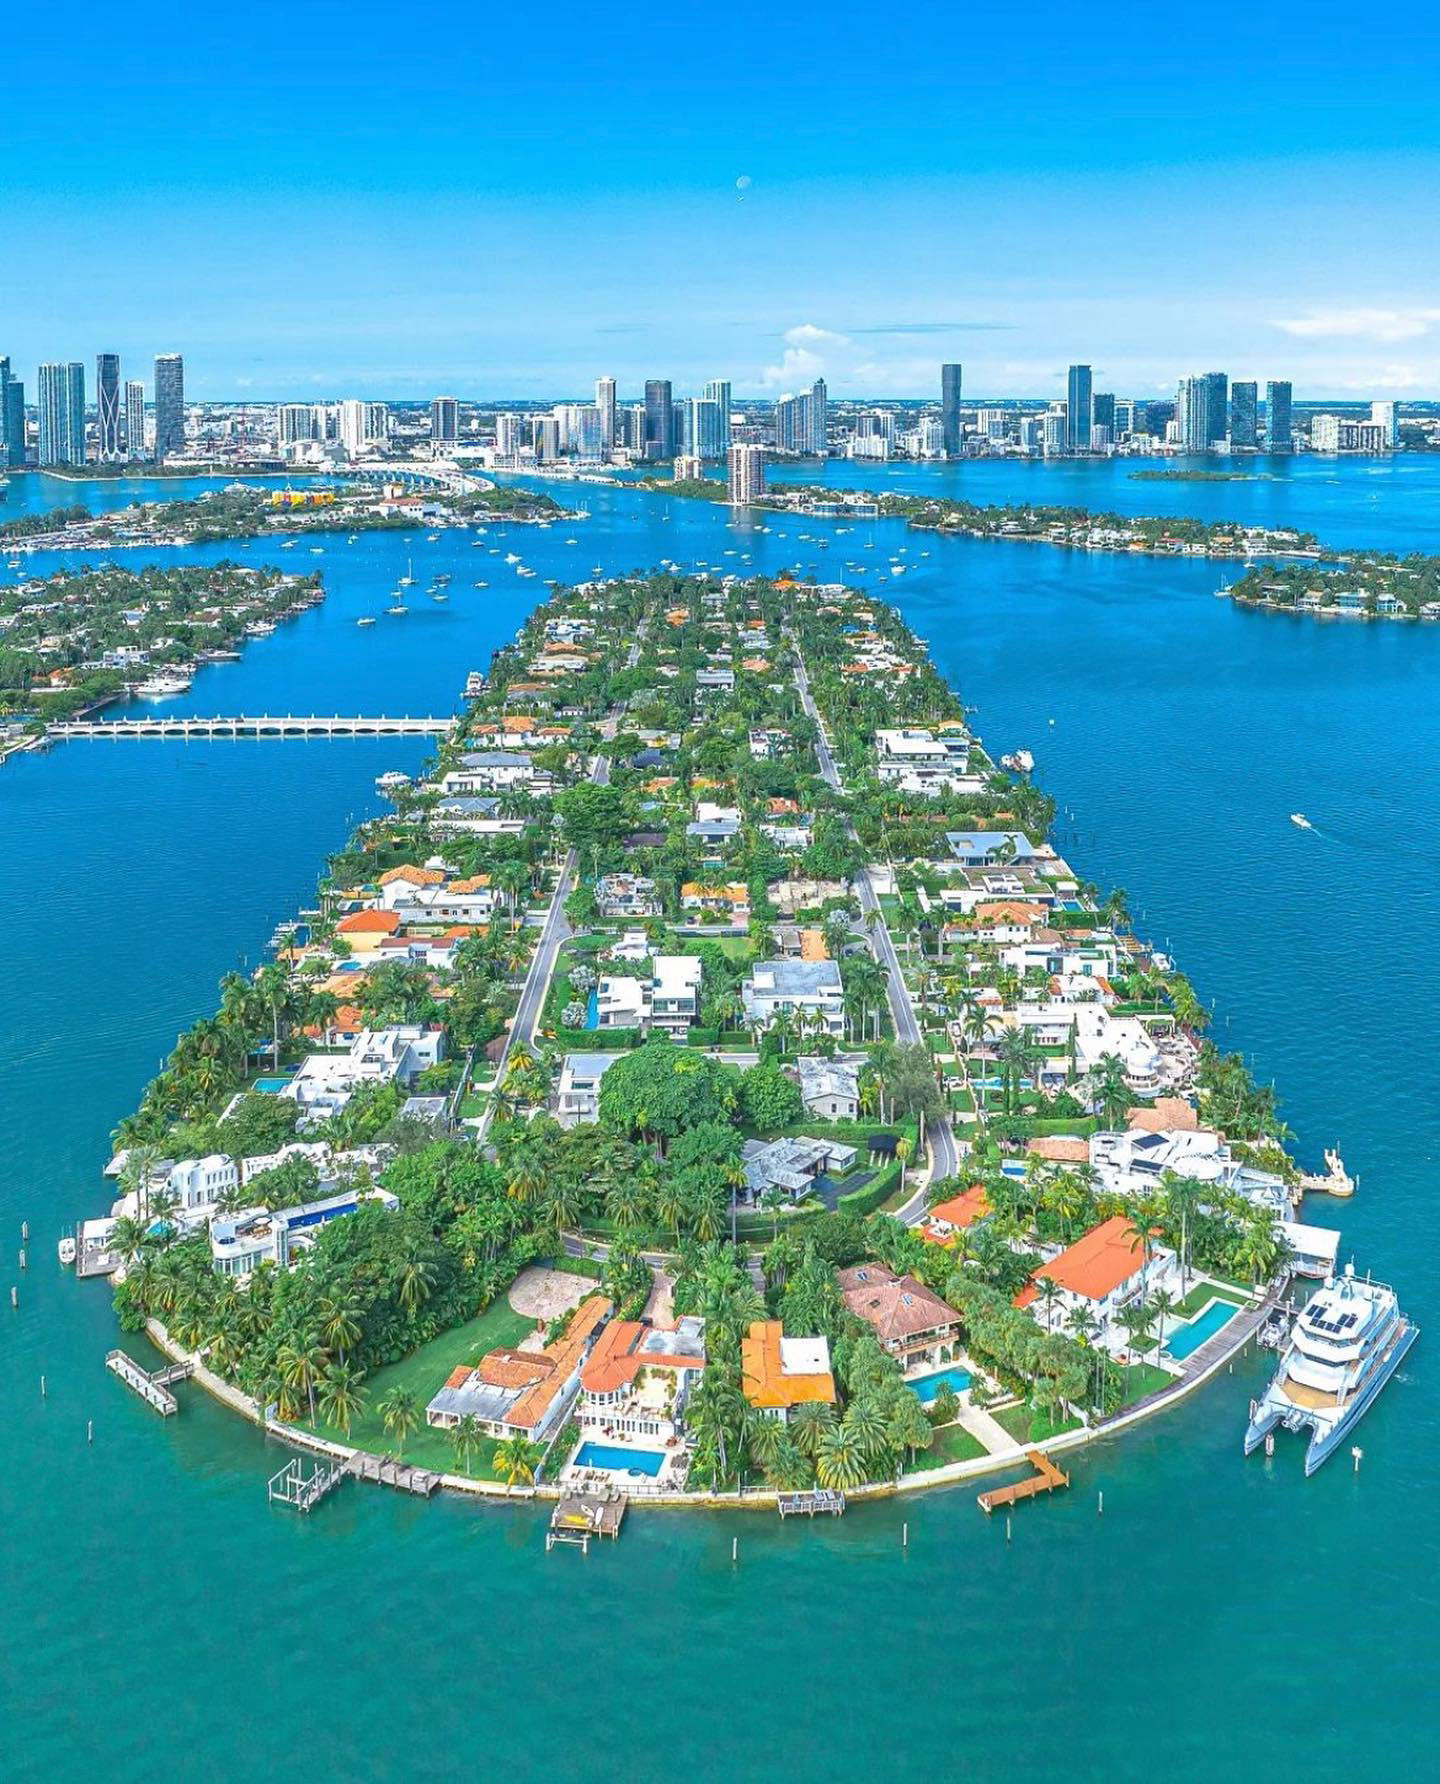 Did you know…that in the post-World War II economic expansion and sprawl in South Florida, Palm and